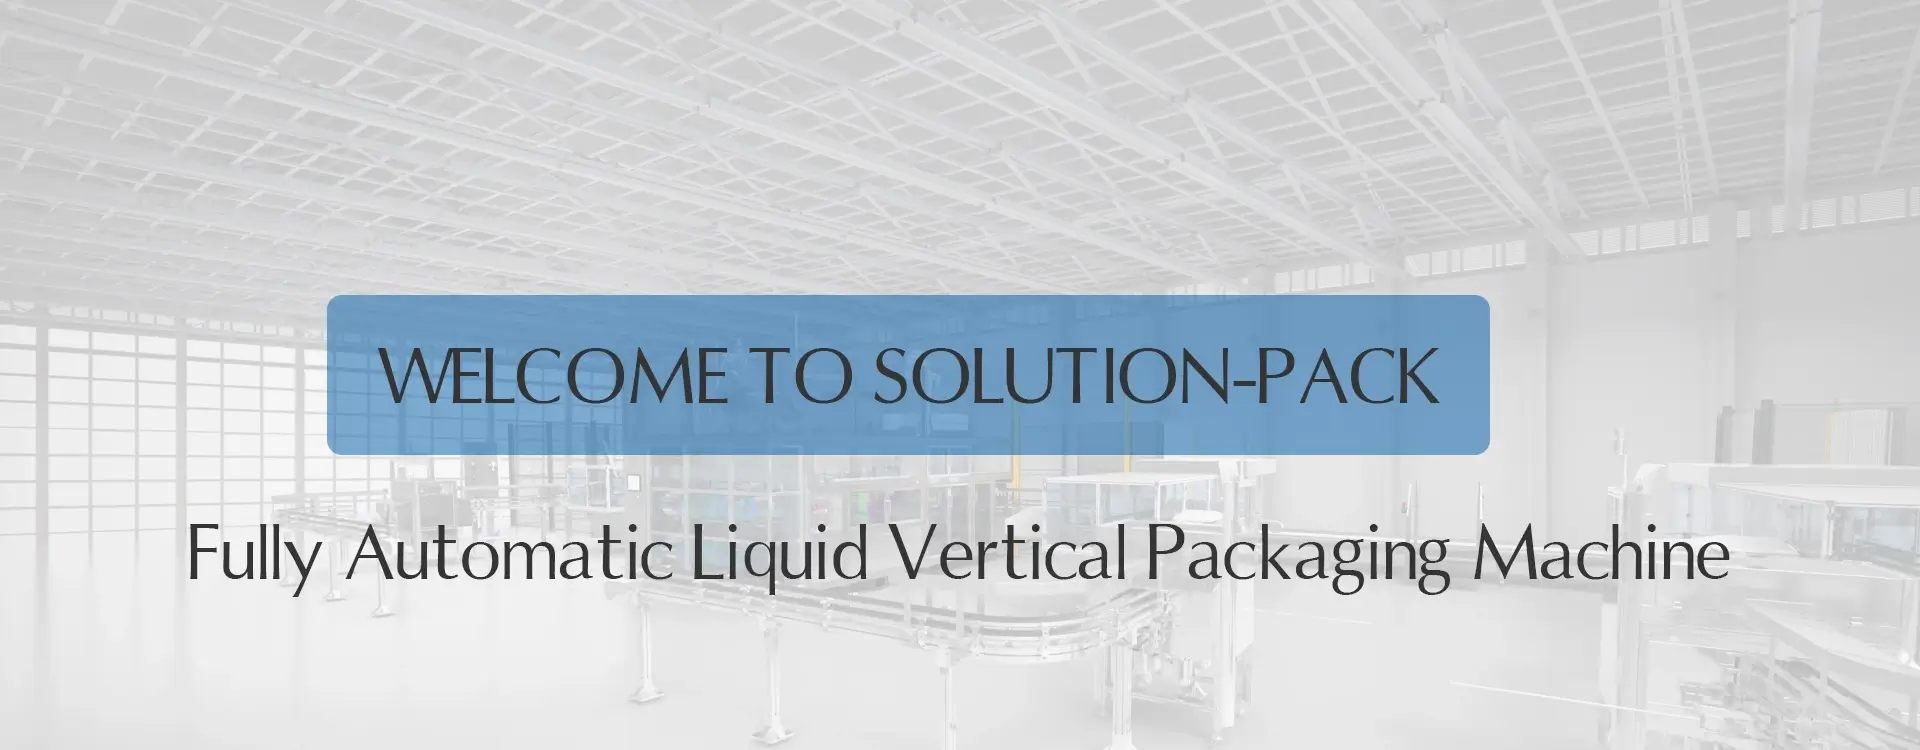 Model VSP630Y Automatic Liquid Vertical Packaging Machine Unit | Solution-Pack (Middle Banner Picture)